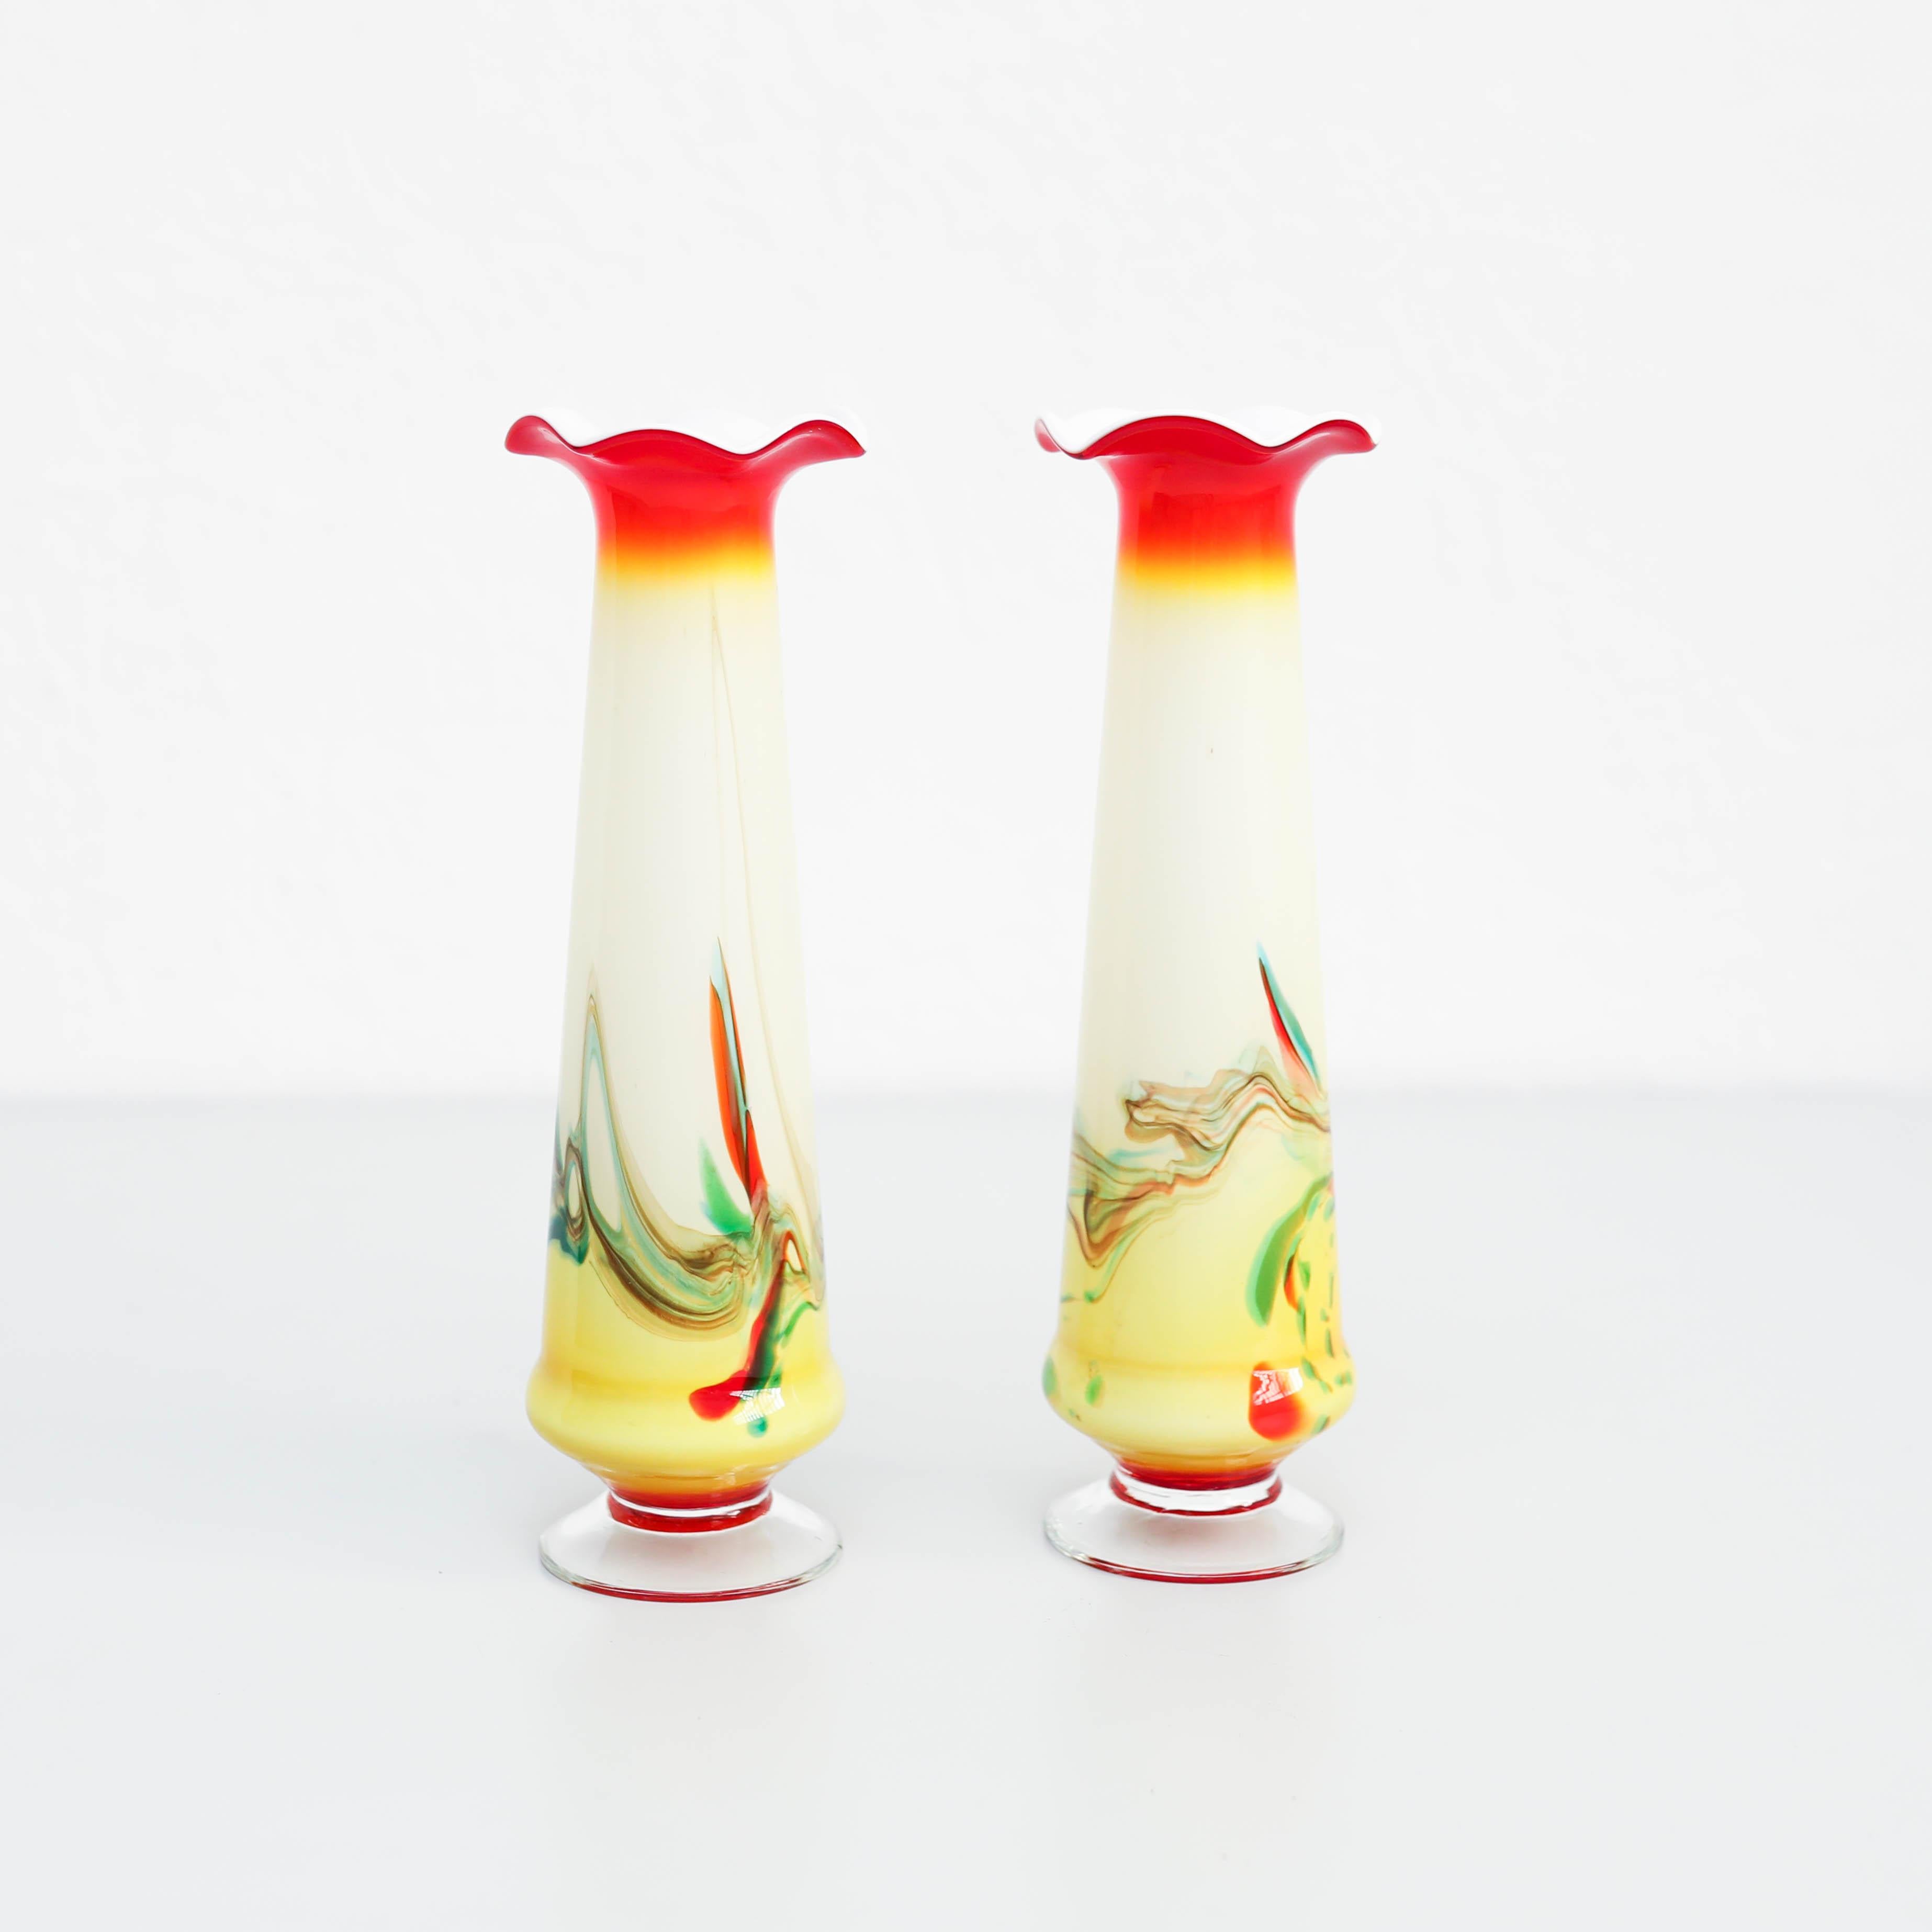 Rustic Set of 2 Vintage Painted Glass Vases, circa 1940